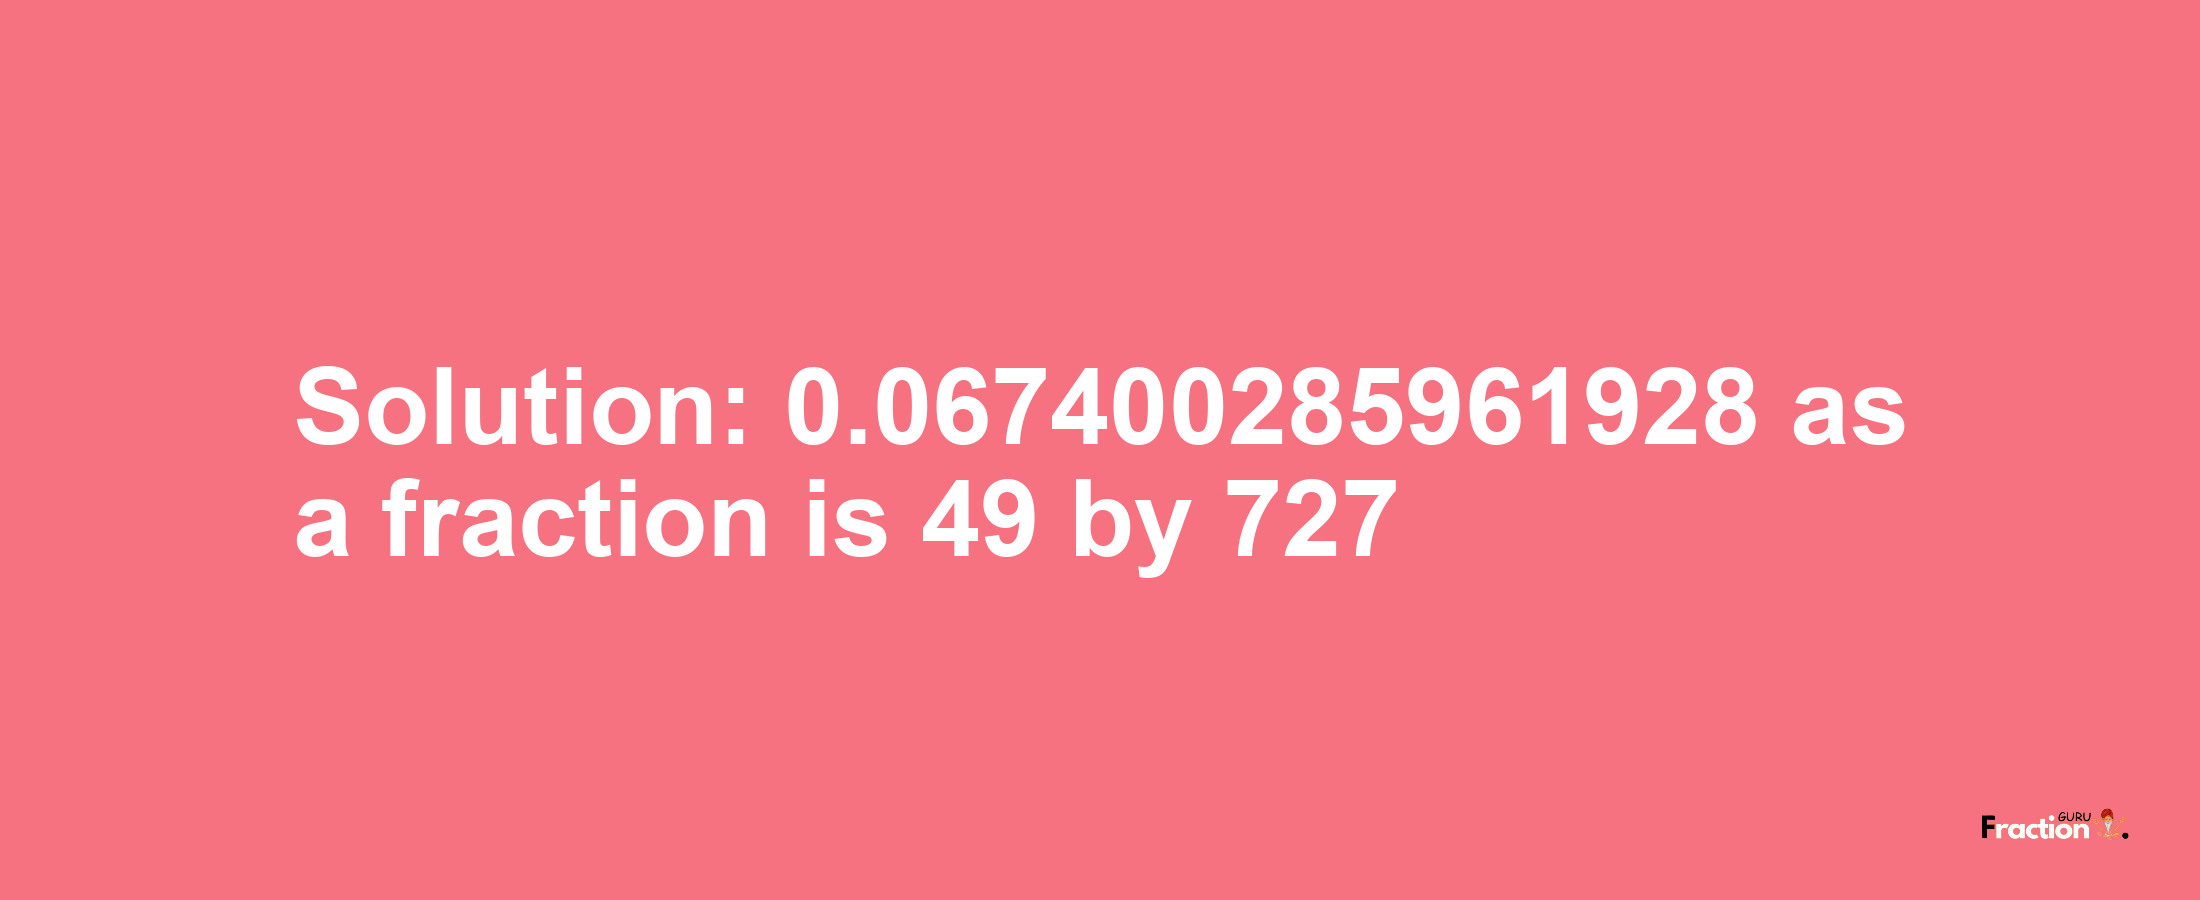 Solution:0.067400285961928 as a fraction is 49/727